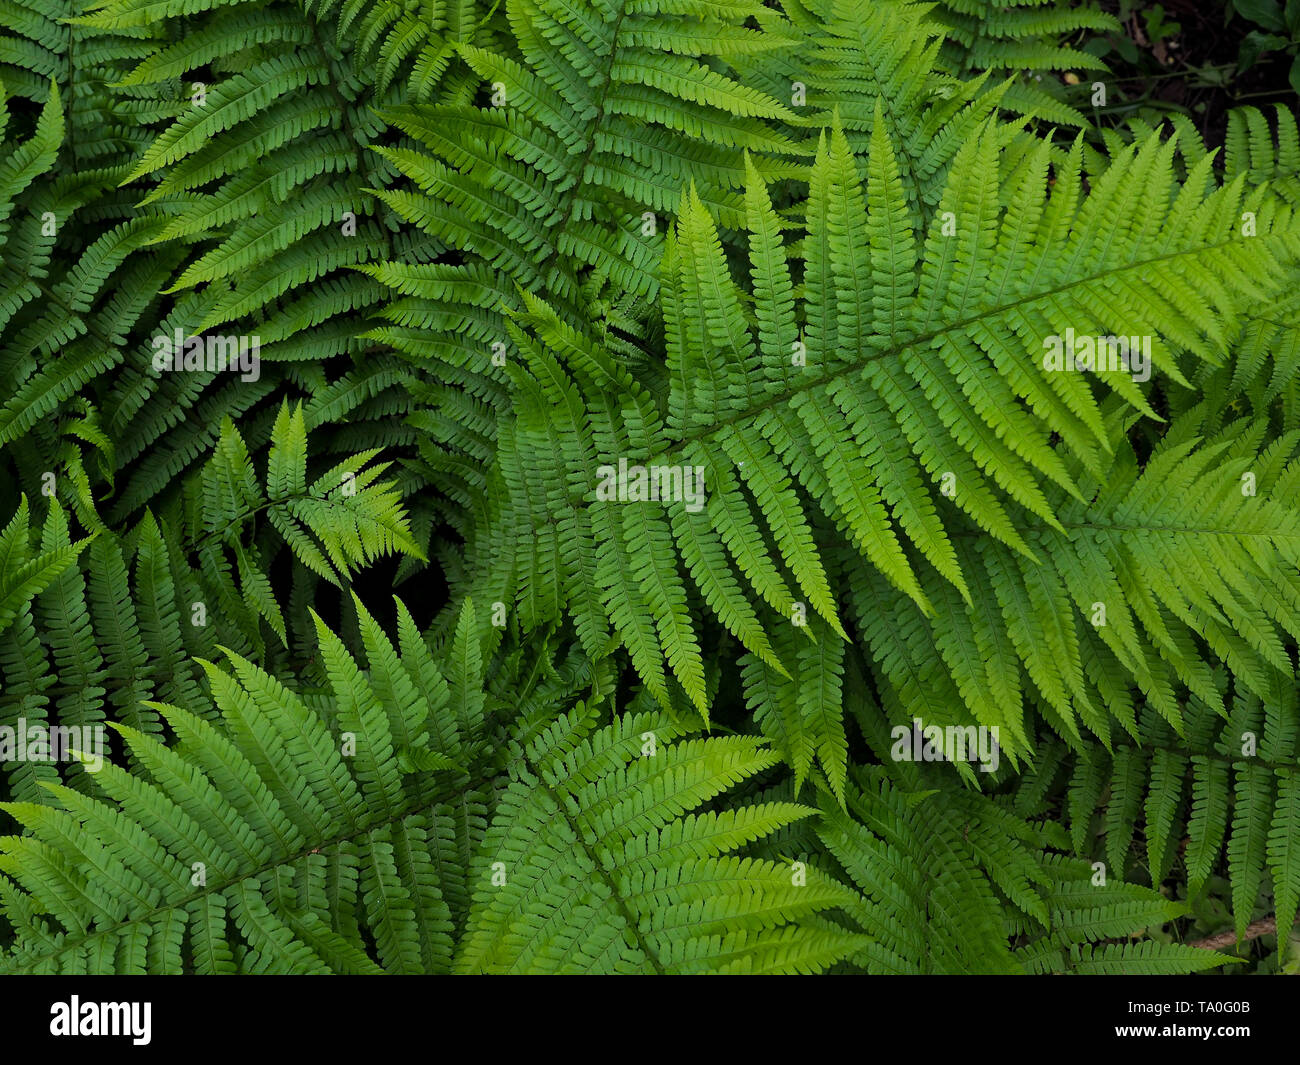 Creative layout made of green leaves. fern, bracken, Flat lay. Nature background Stock Photo